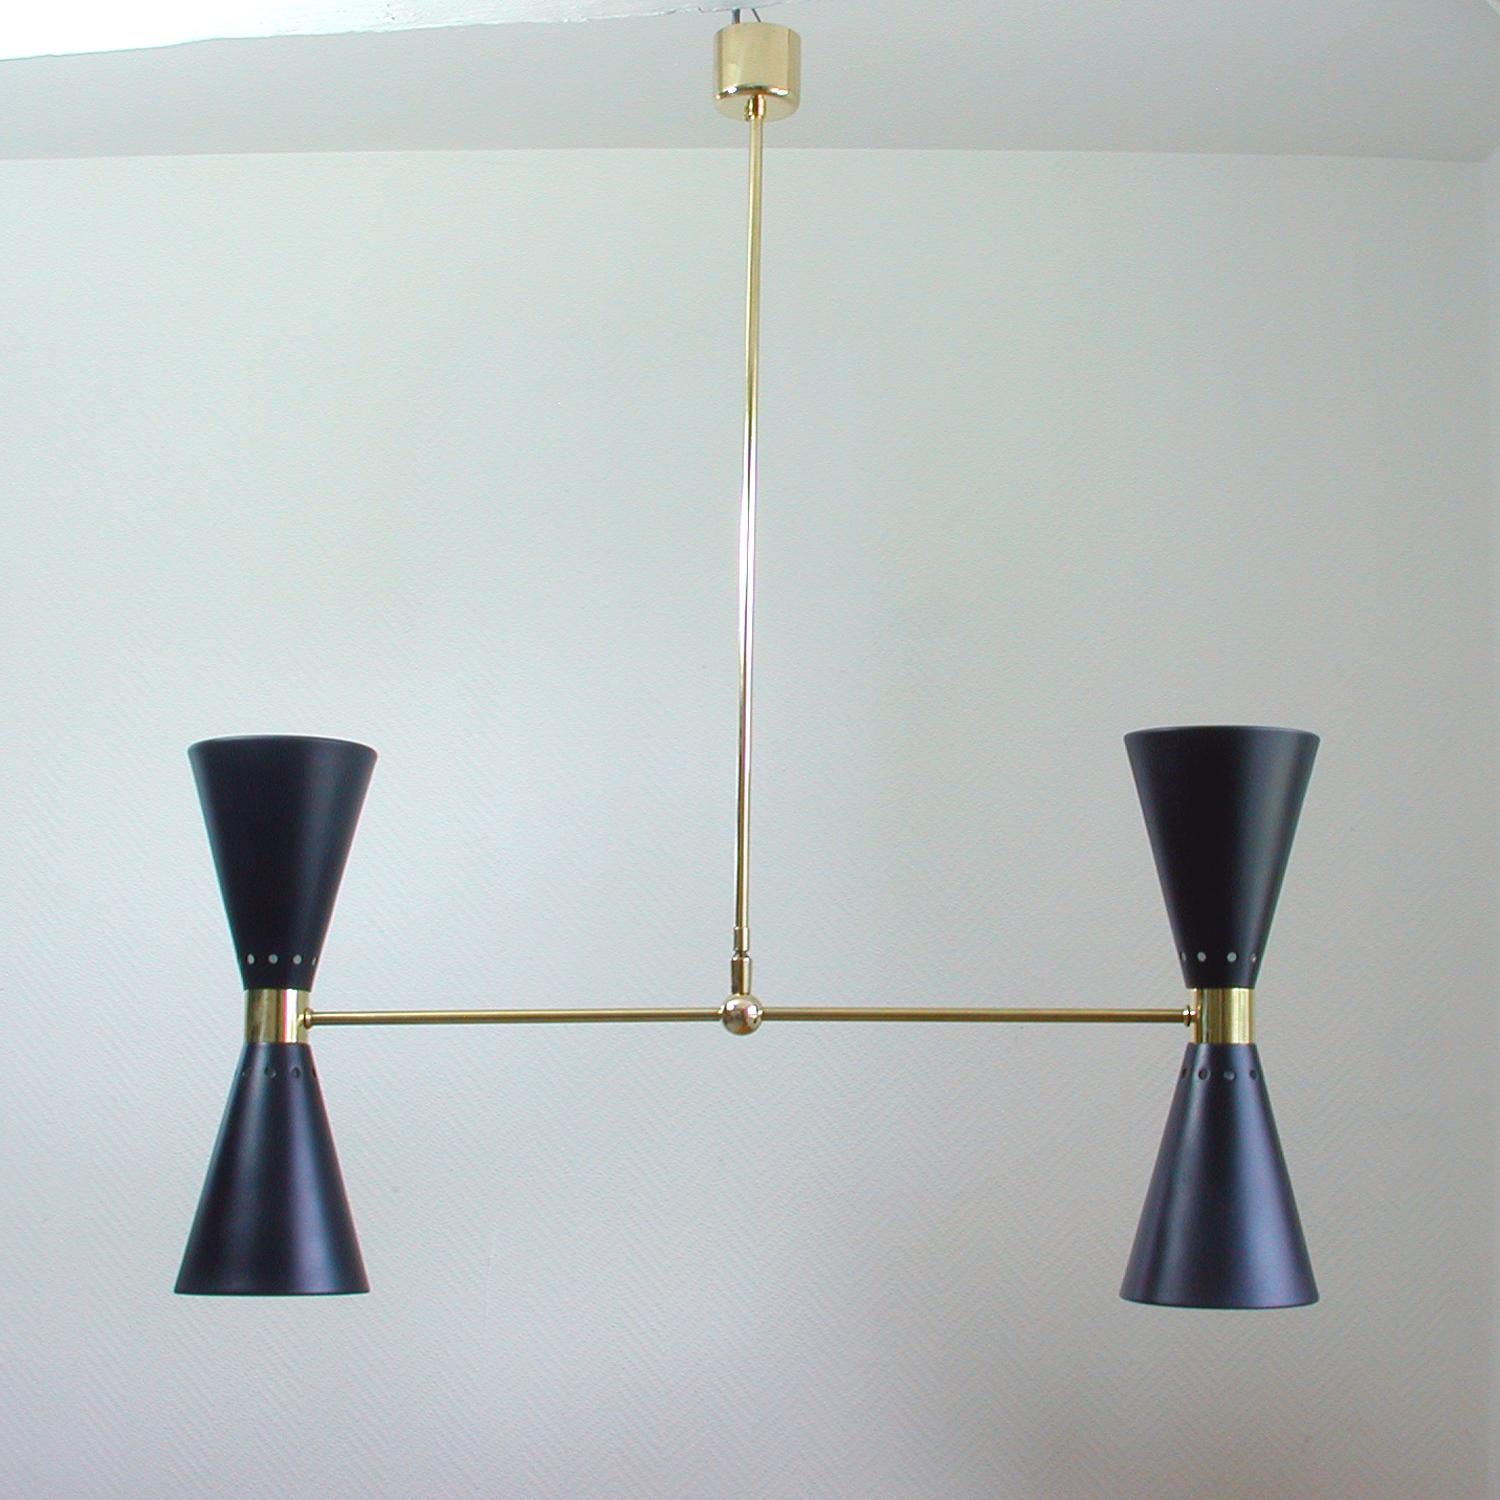 This elegant double cone chandelier was manufactured in France in the 1950s. It is made of brass and has got two black painted aluminum up and down diabolo shades.

Partially restored. Rewired and reelectrified with (4) E14 candelabra based light